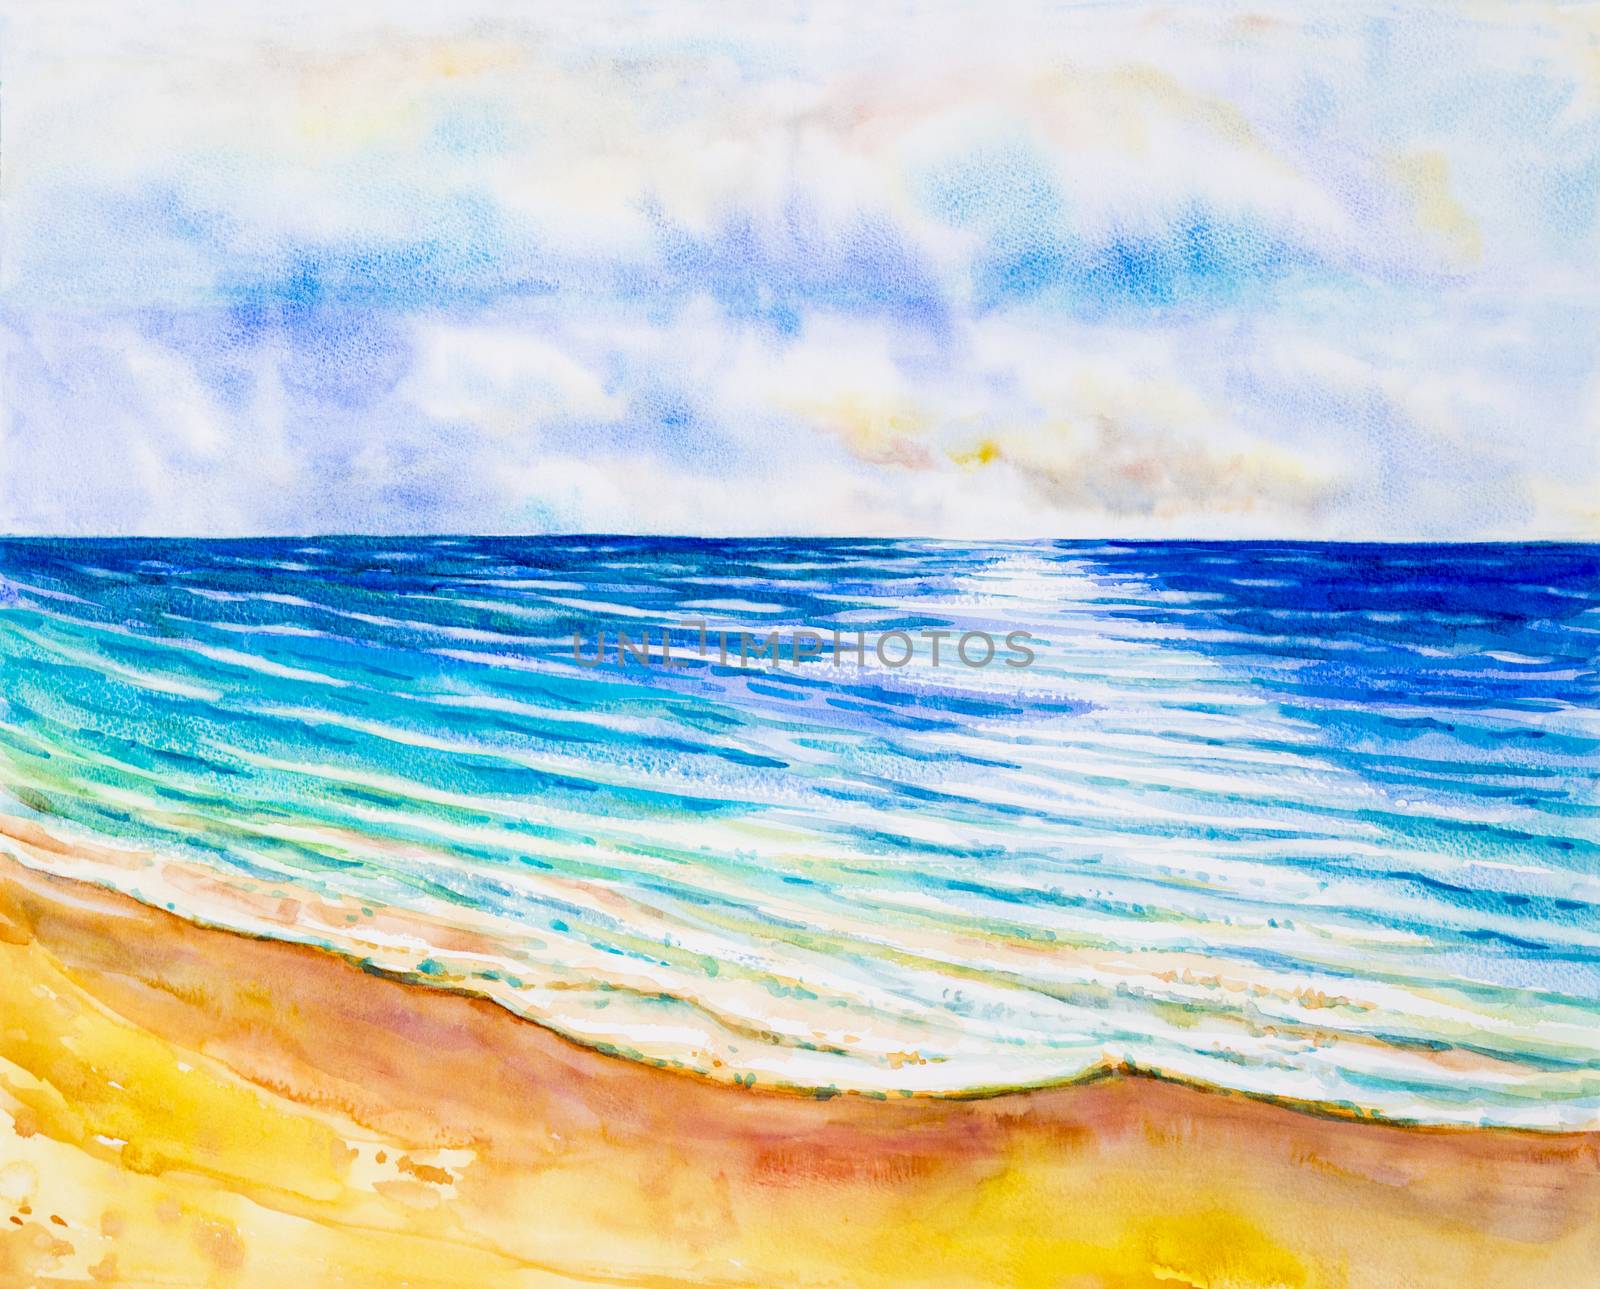 Watercolor seascape original painting colorful of sea view,beach and sky,cloud background in the morning bright, nature beauty season. Painted impressionist, abstract images.